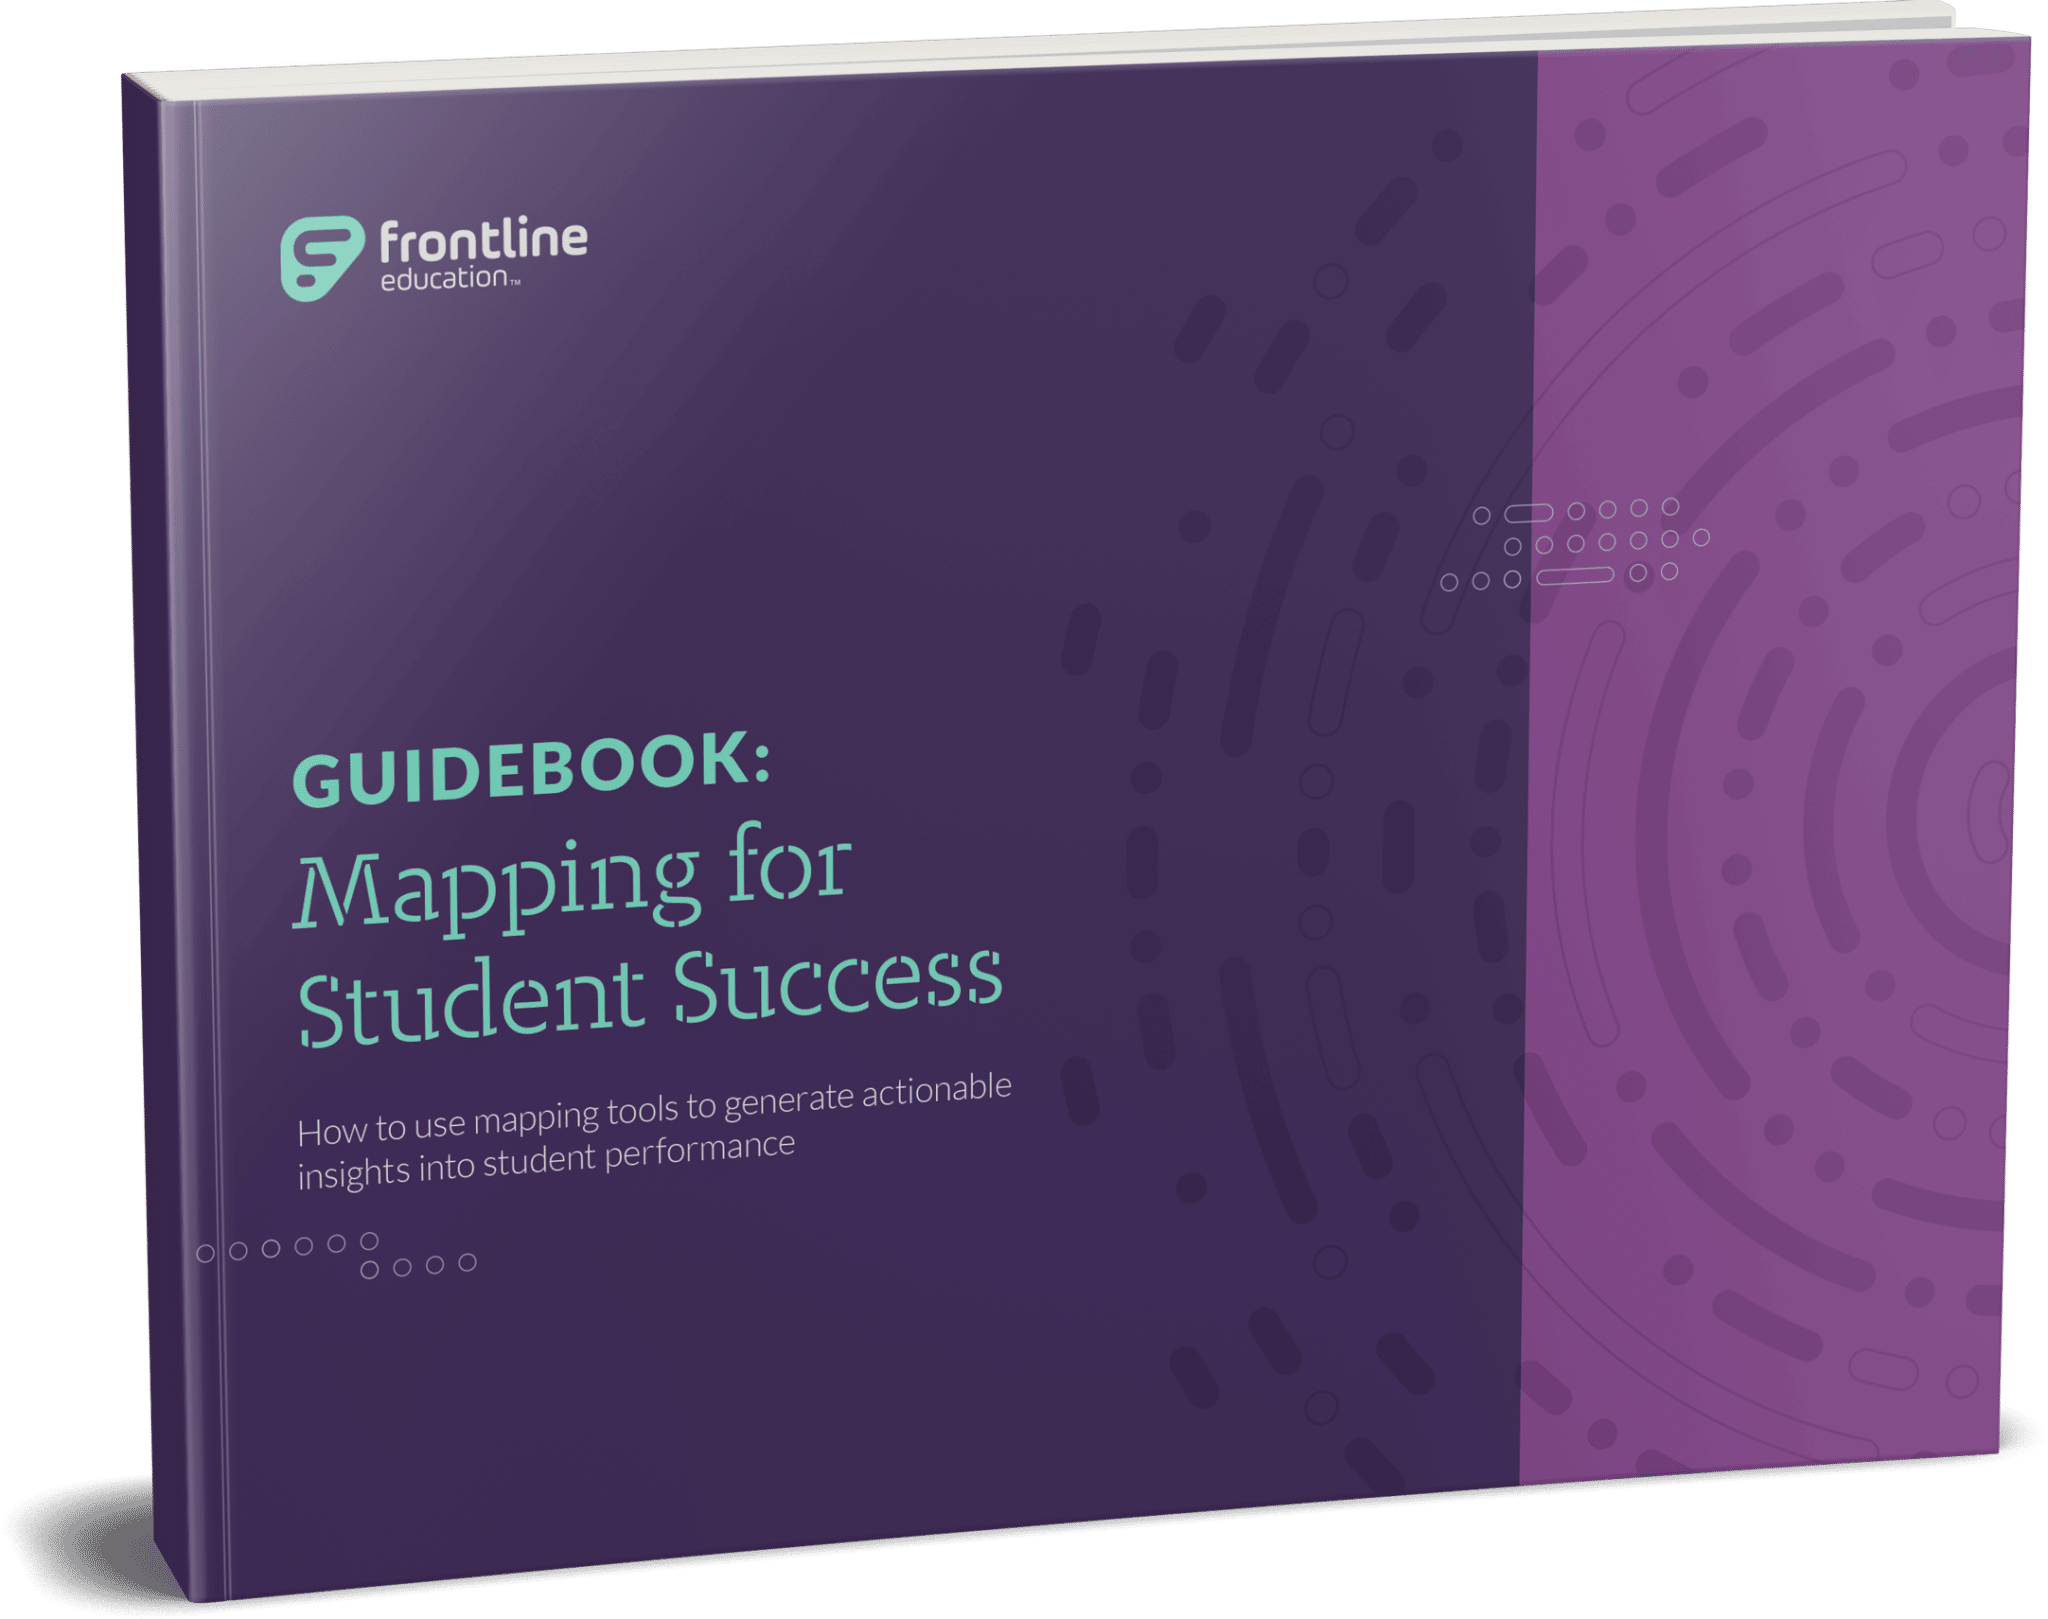 Mockup Guidebook Mapping for Student Success